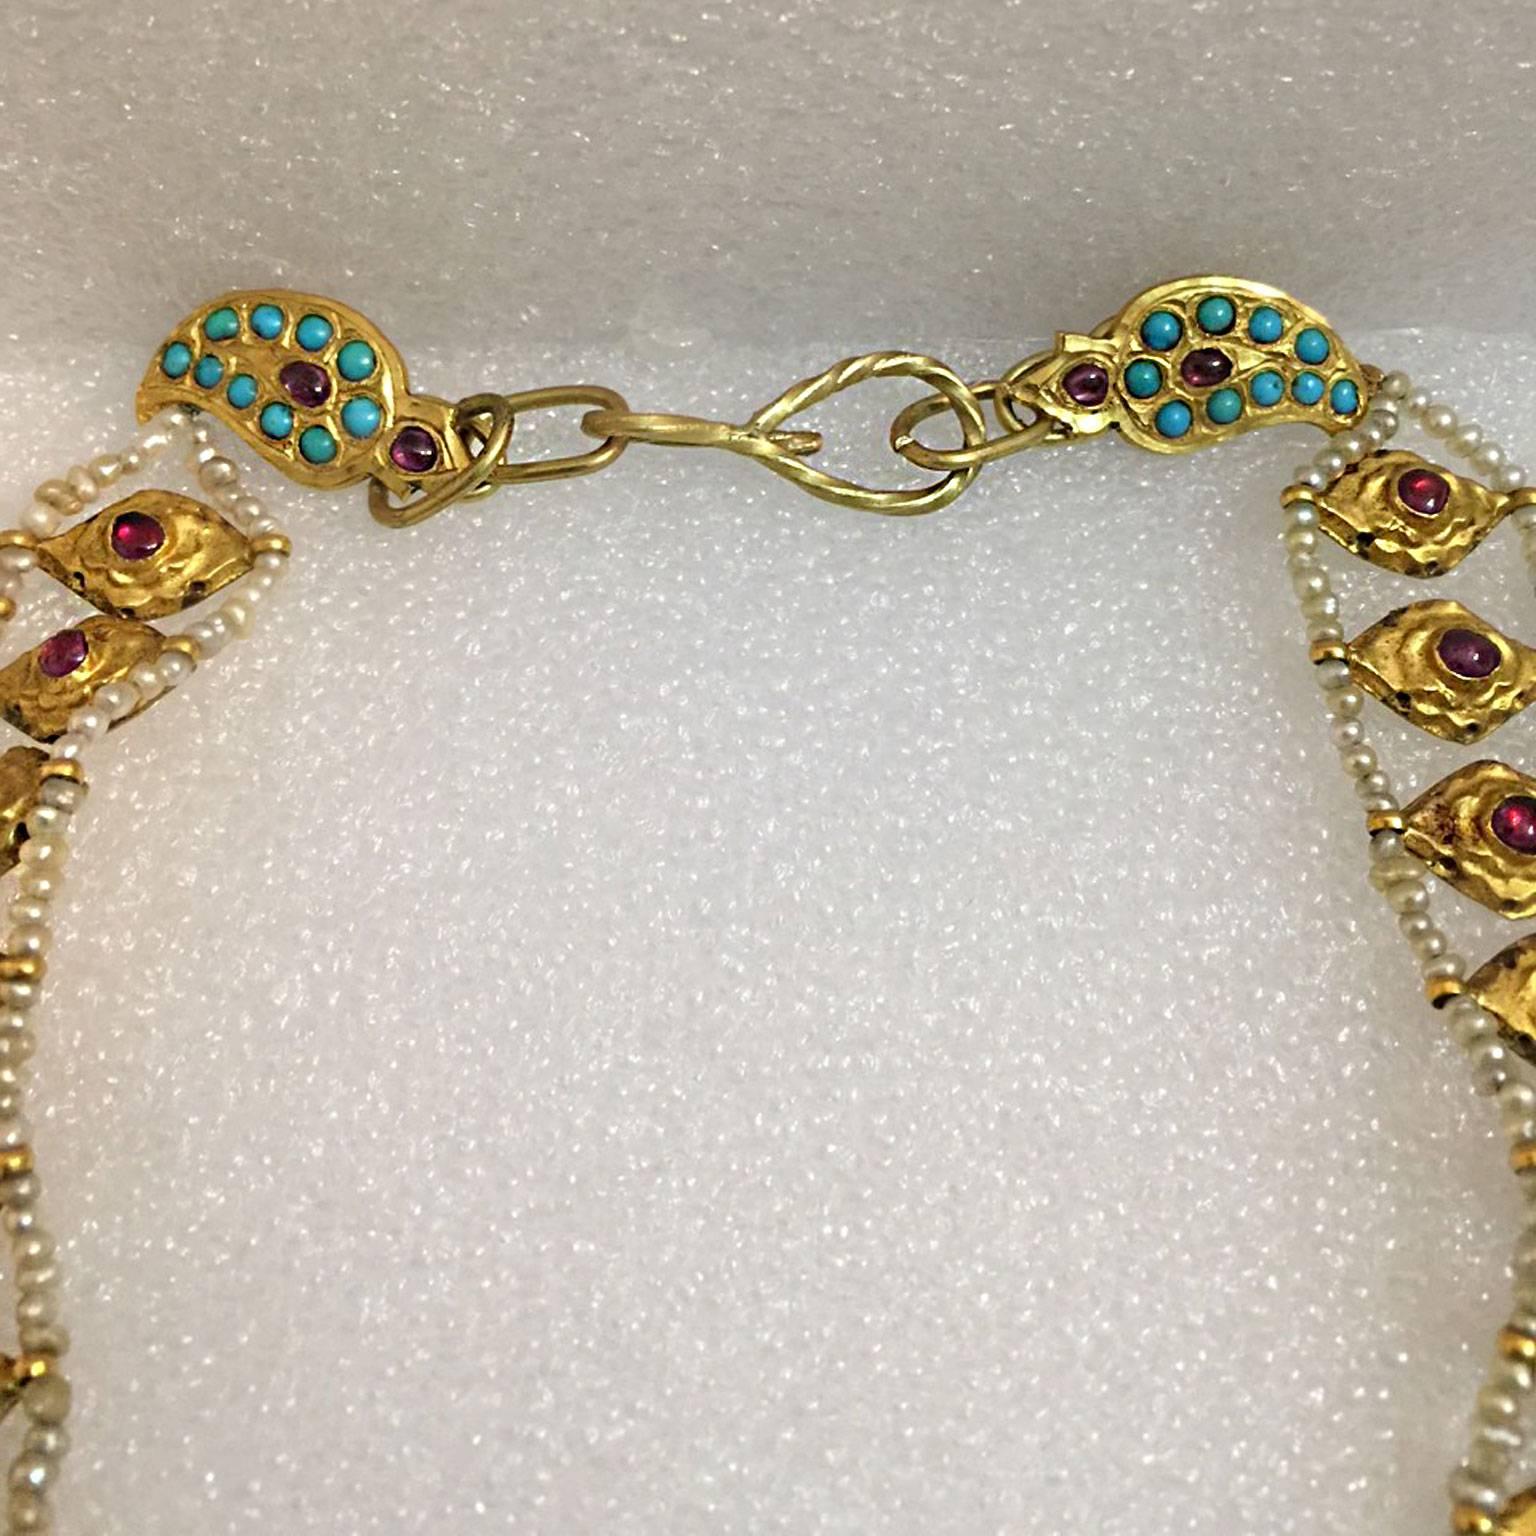 22 Karat Gold Rajasthan Mughal Necklace with Ruby, Turquoise and Pearl For Sale 1